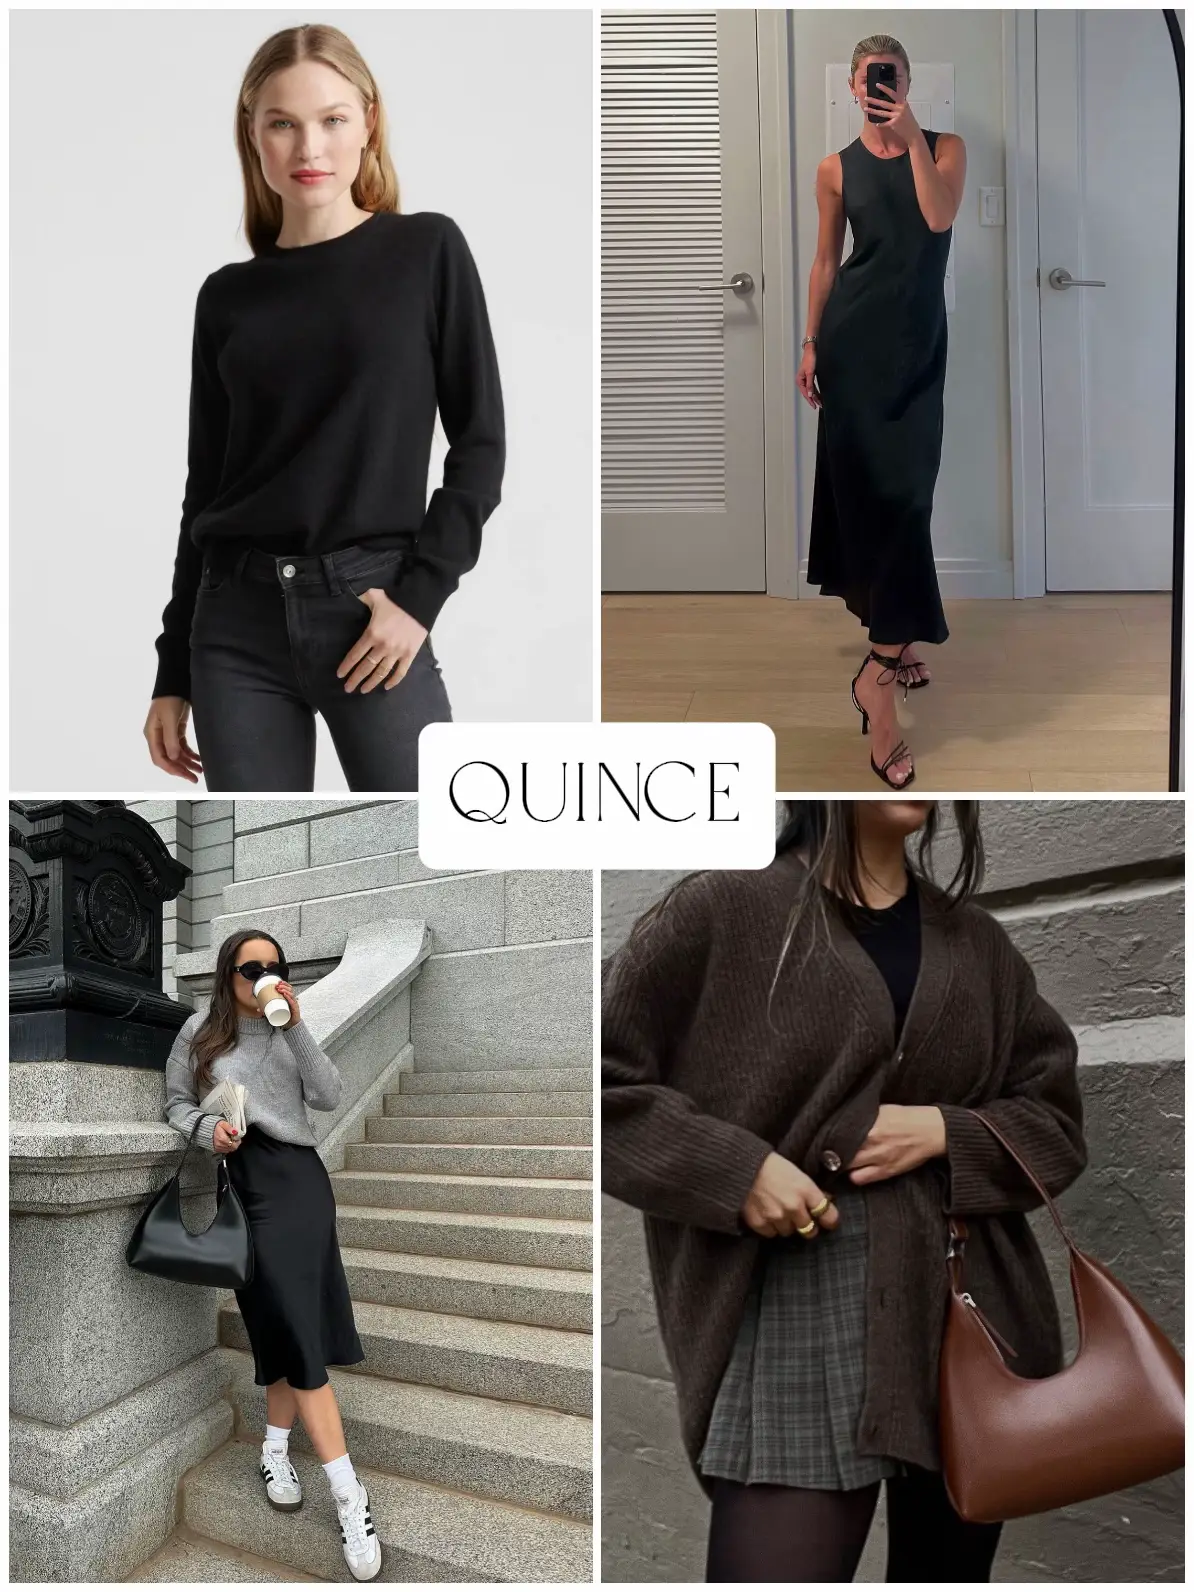 Shop Quince Linen Clothing if You Have Eczema